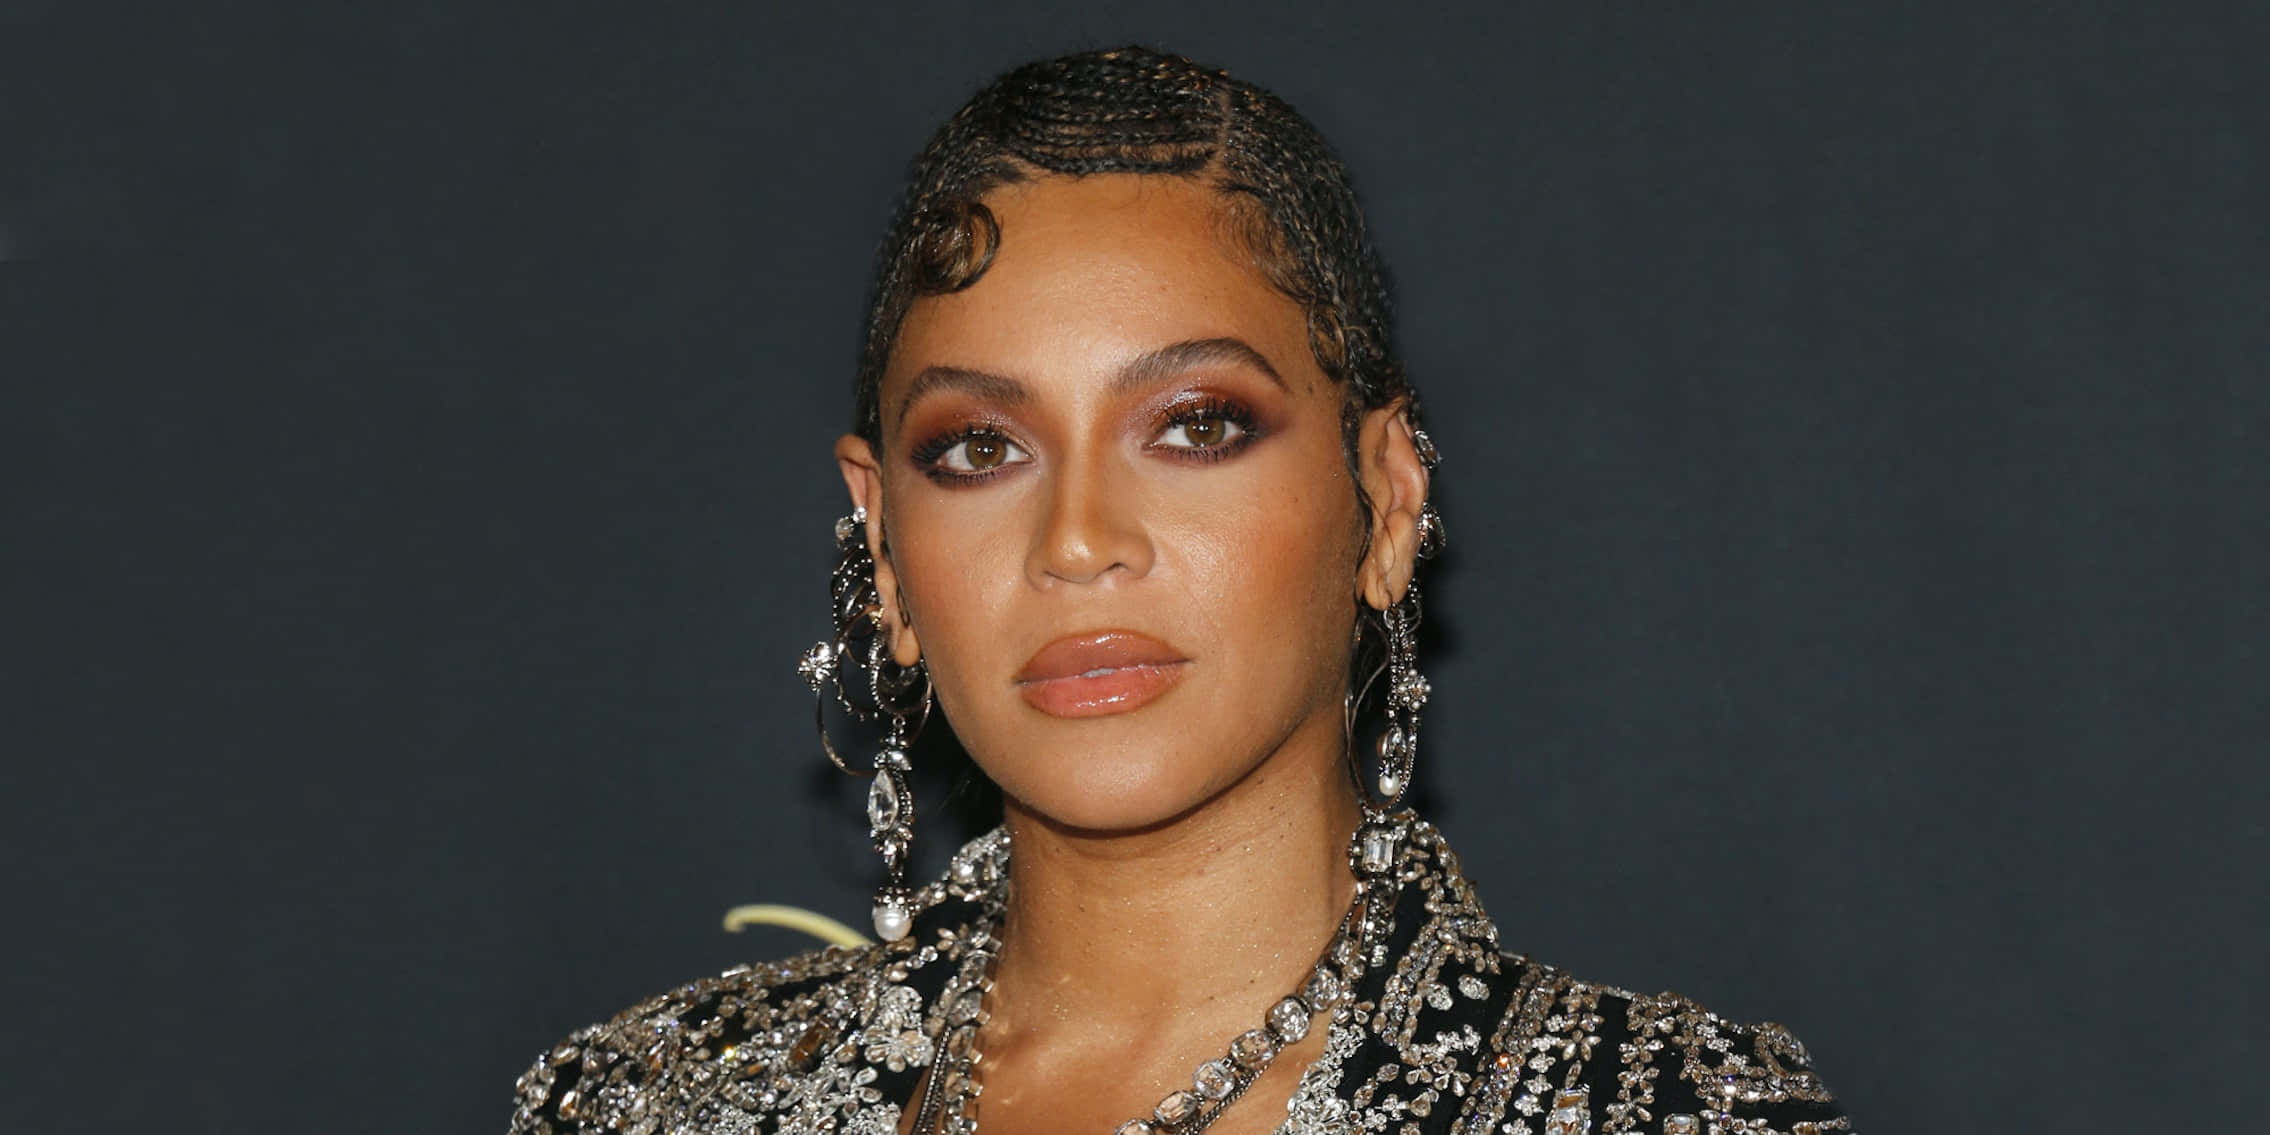 Stunning in Silver - Queen Bey shines brighter than ever